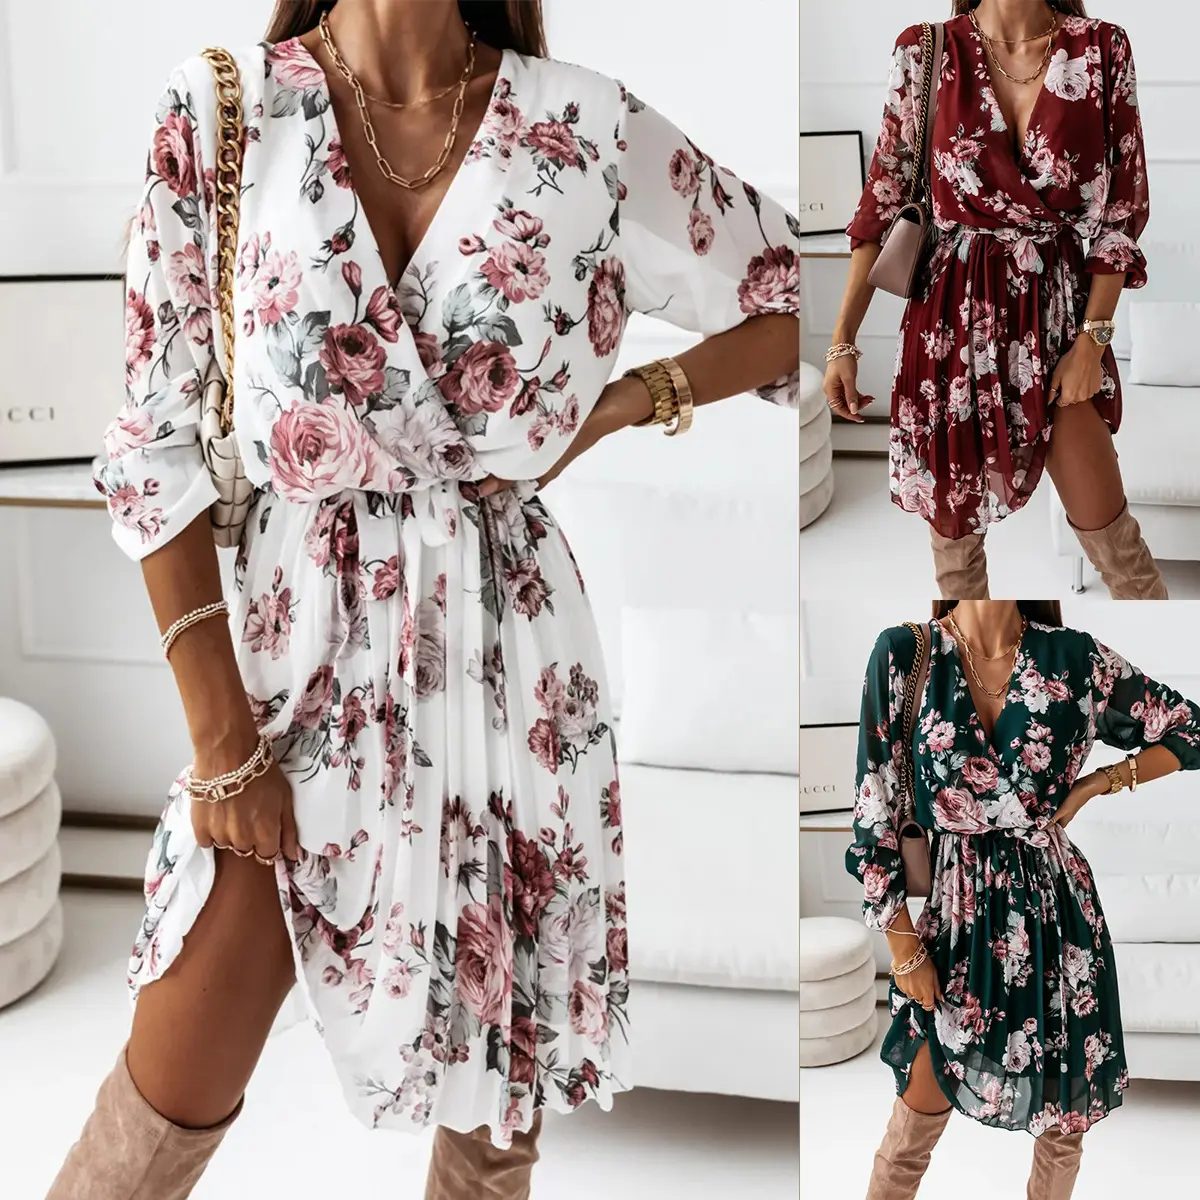 Pleated Summer Floral Short Dress 2022 Chiffon Dresses For Ladies